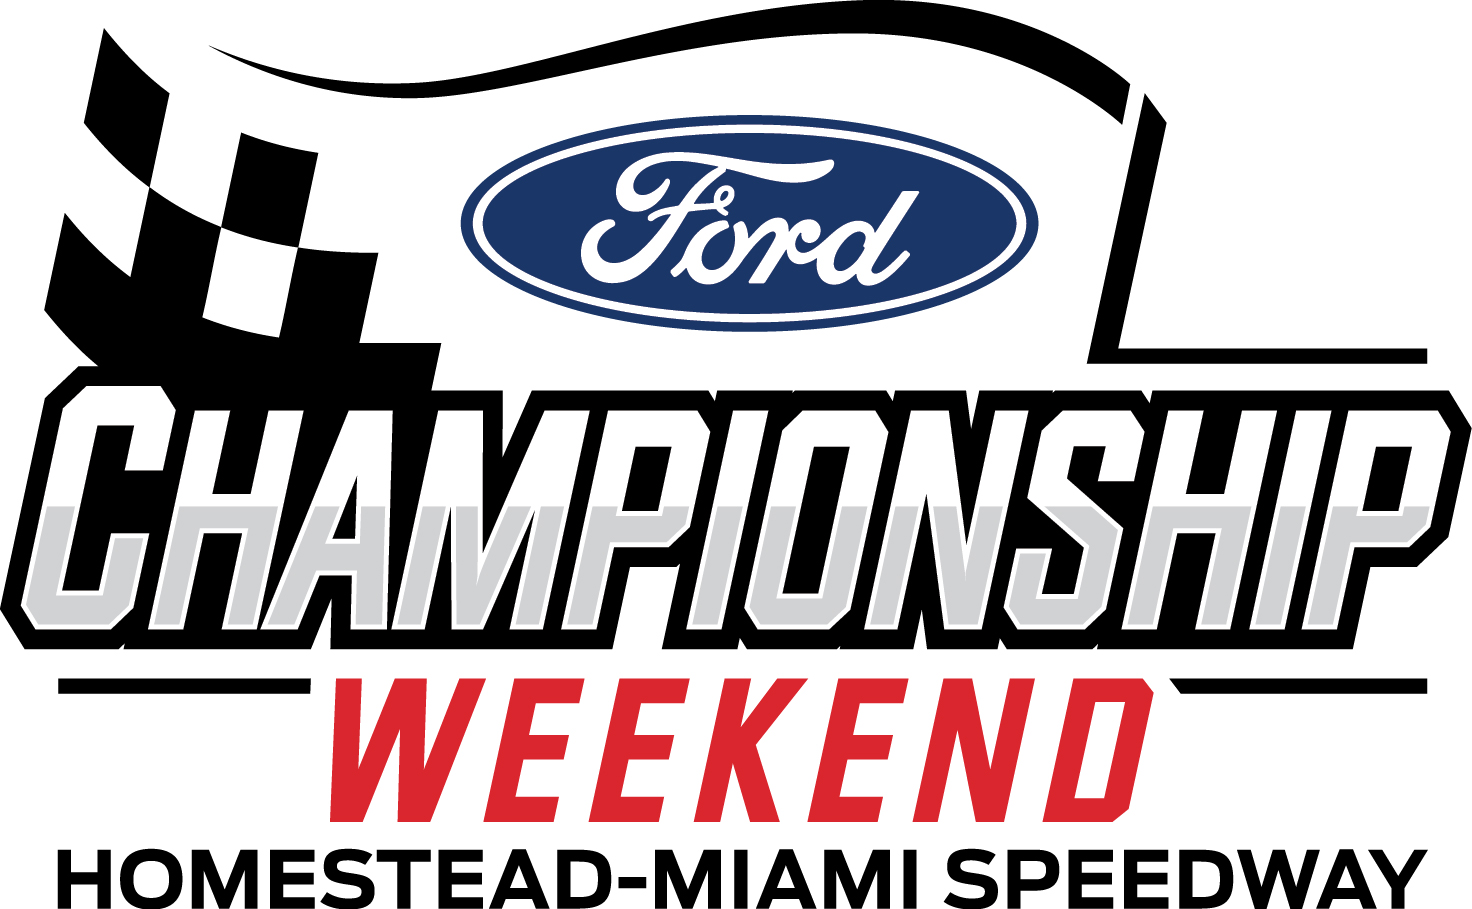 This is Ford's big weekend. But of the two Ford's in contention for the title, one, Joey Logano, has a payback coming and chances are Martin Truex Jr. will stuff him into the wall. Paybacks are a bitch